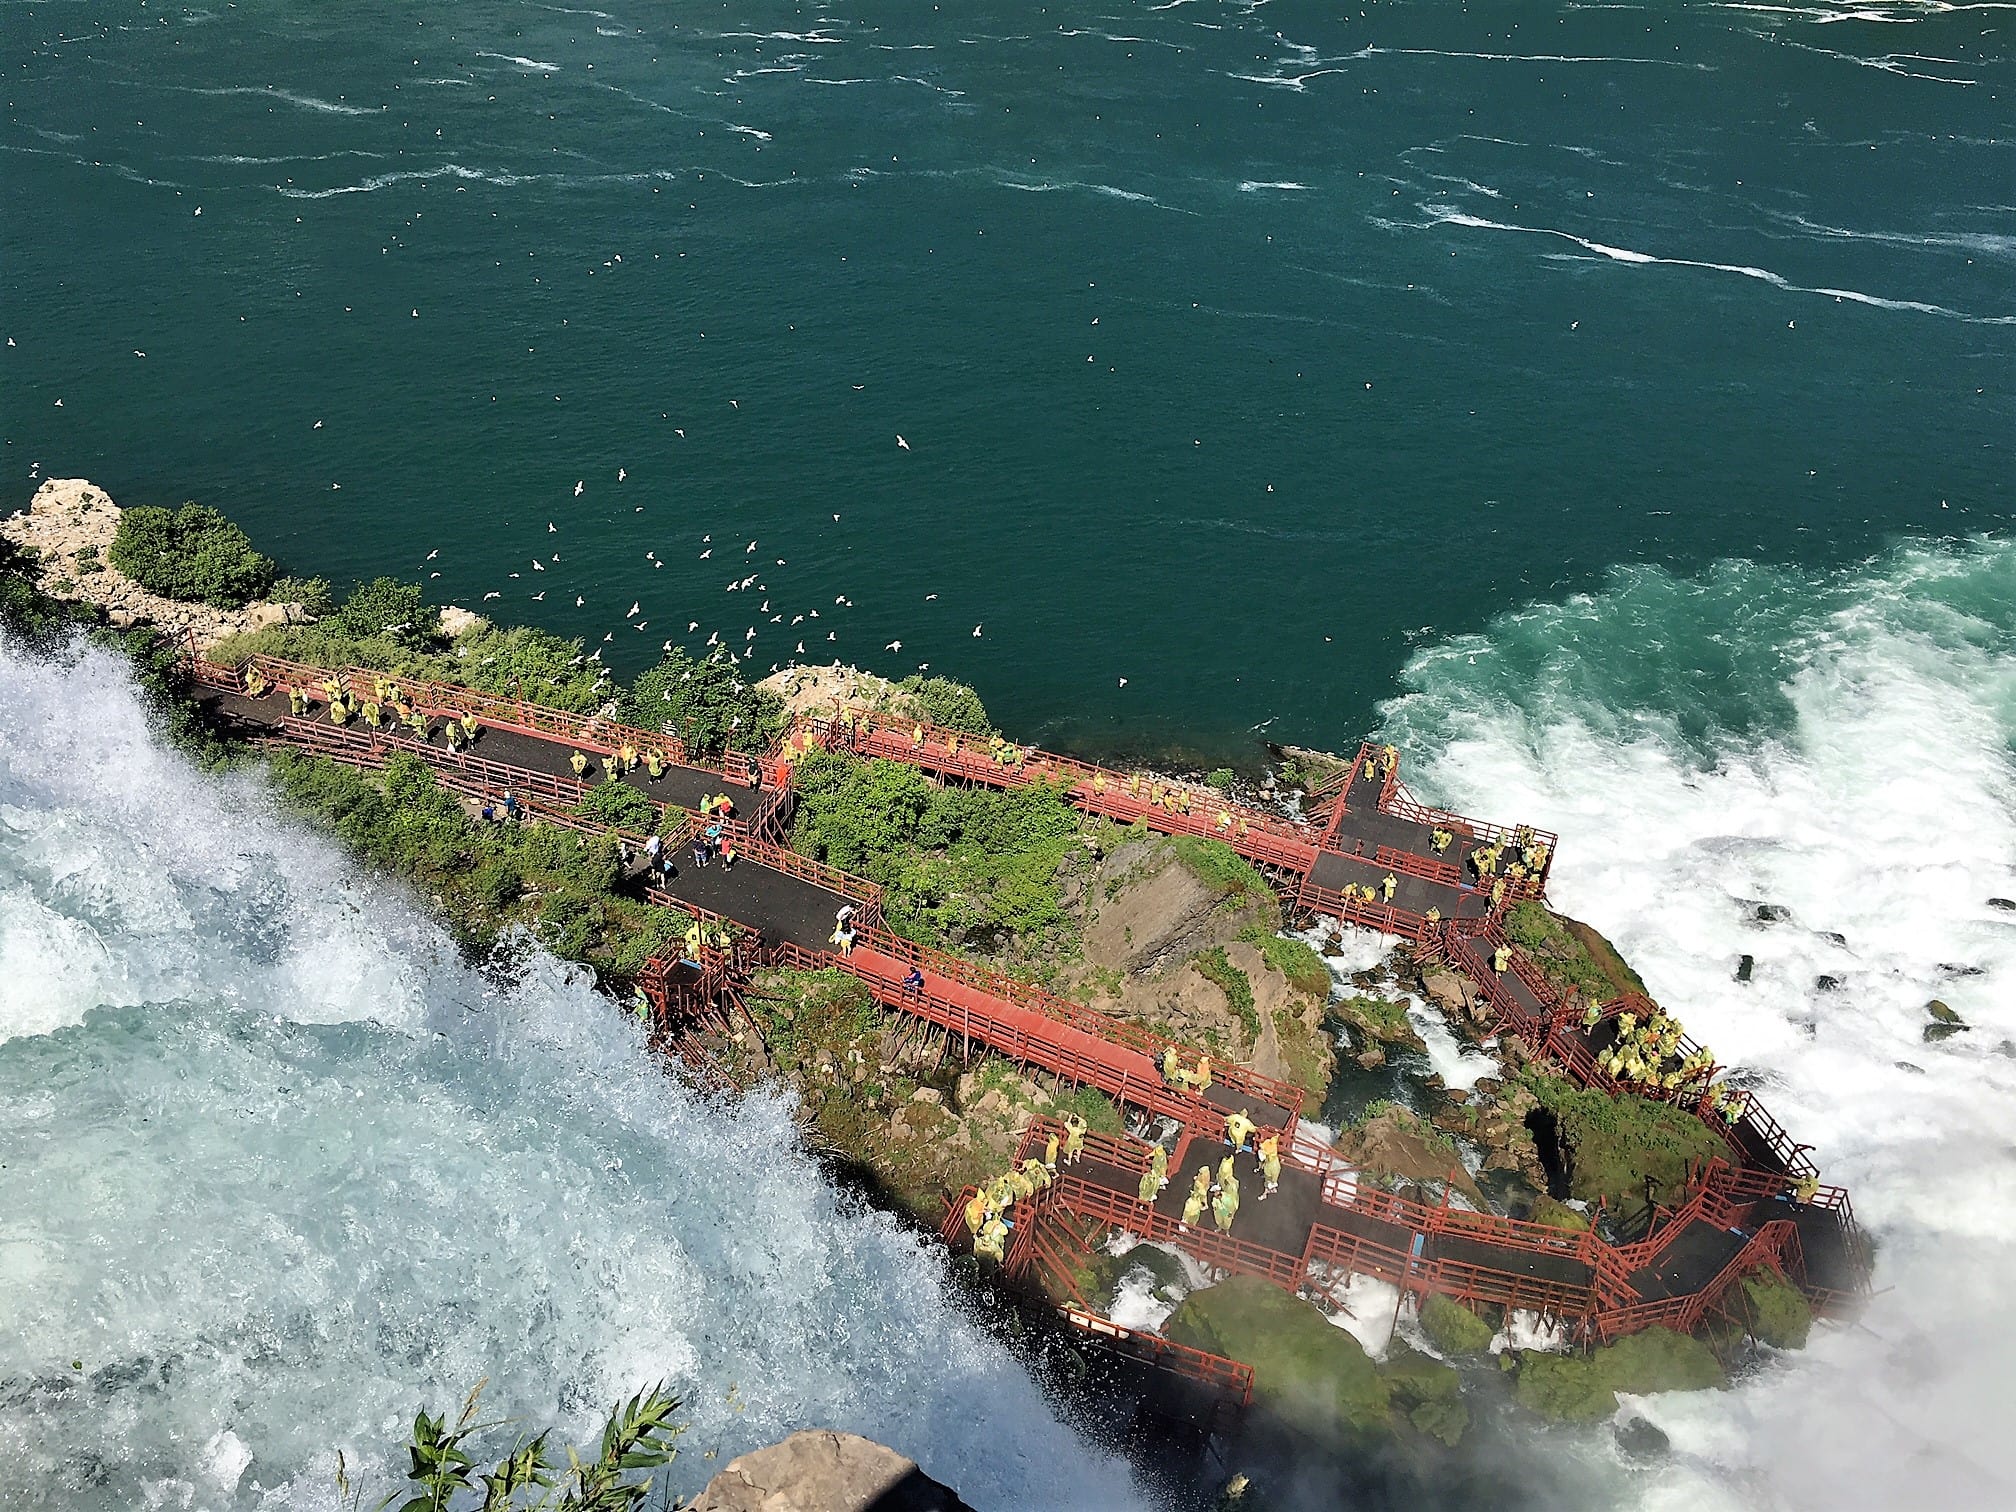 View of the Cave of the Winds from above. - "Cave of the Winds: Niagara Falls Closeup" - Two Traveling Texans